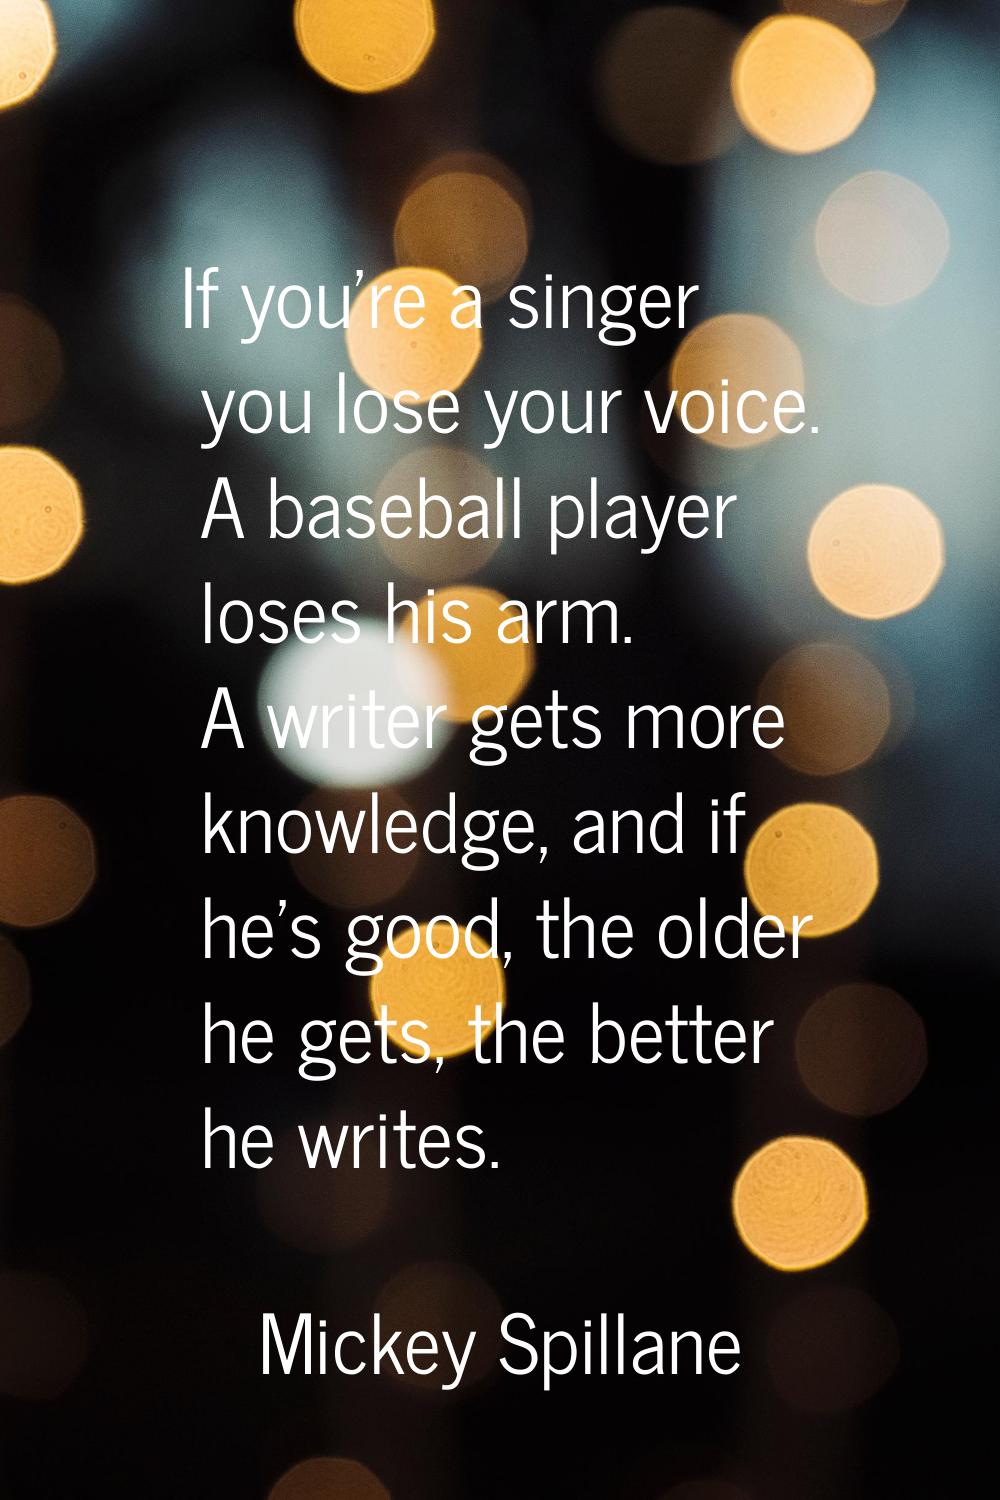 If you're a singer you lose your voice. A baseball player loses his arm. A writer gets more knowled